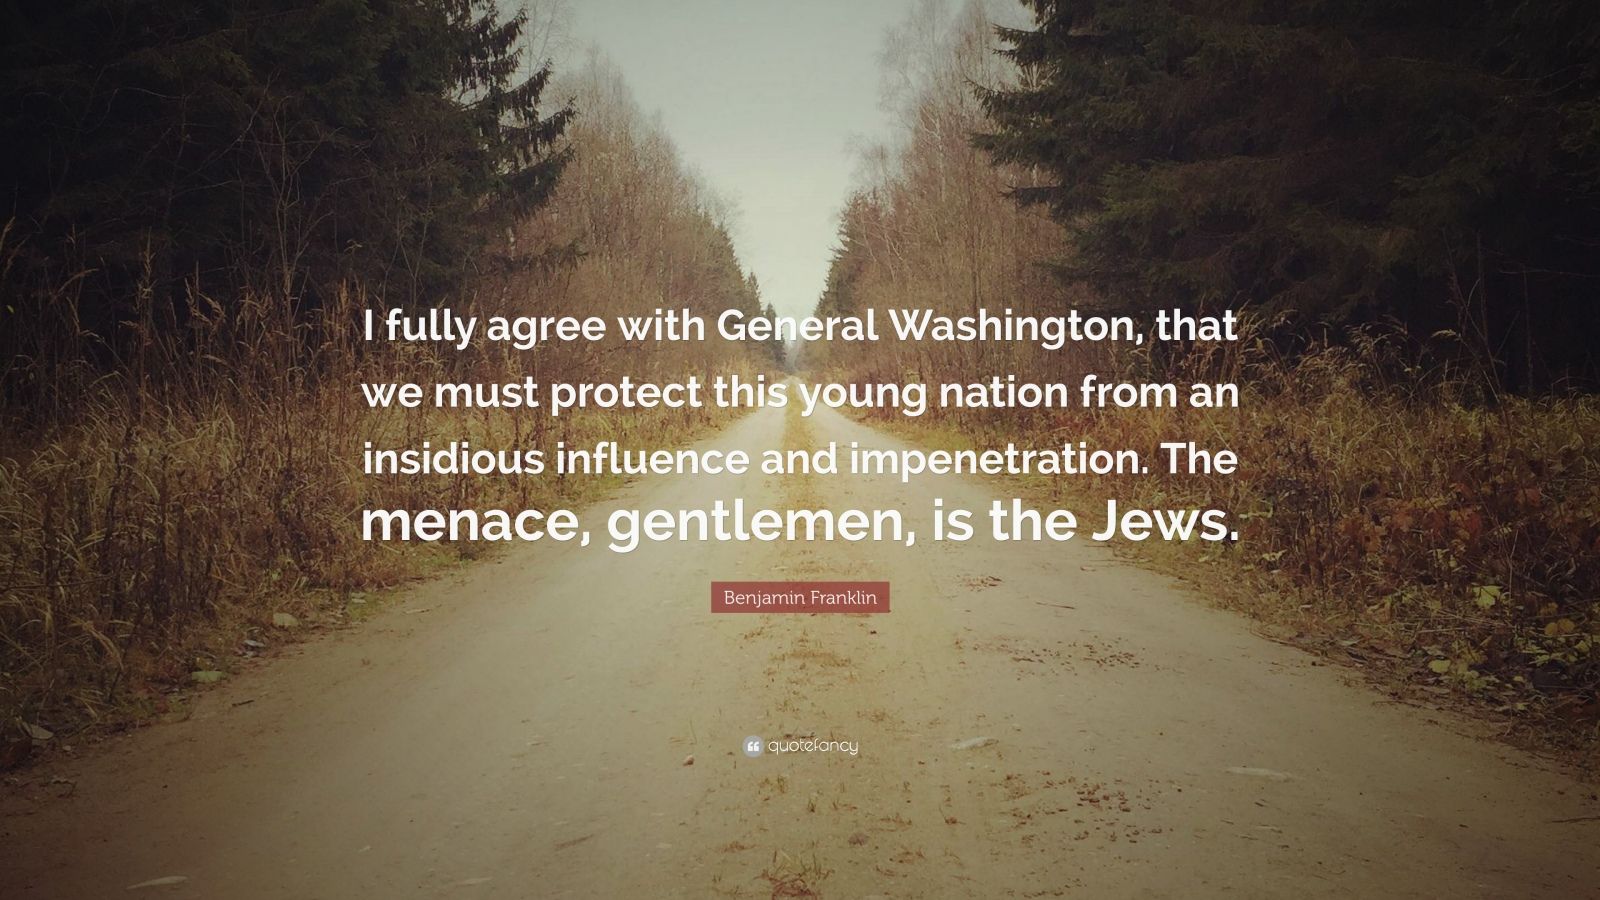 Benjamin Franklin Quote: “I fully agree with General Washington, that